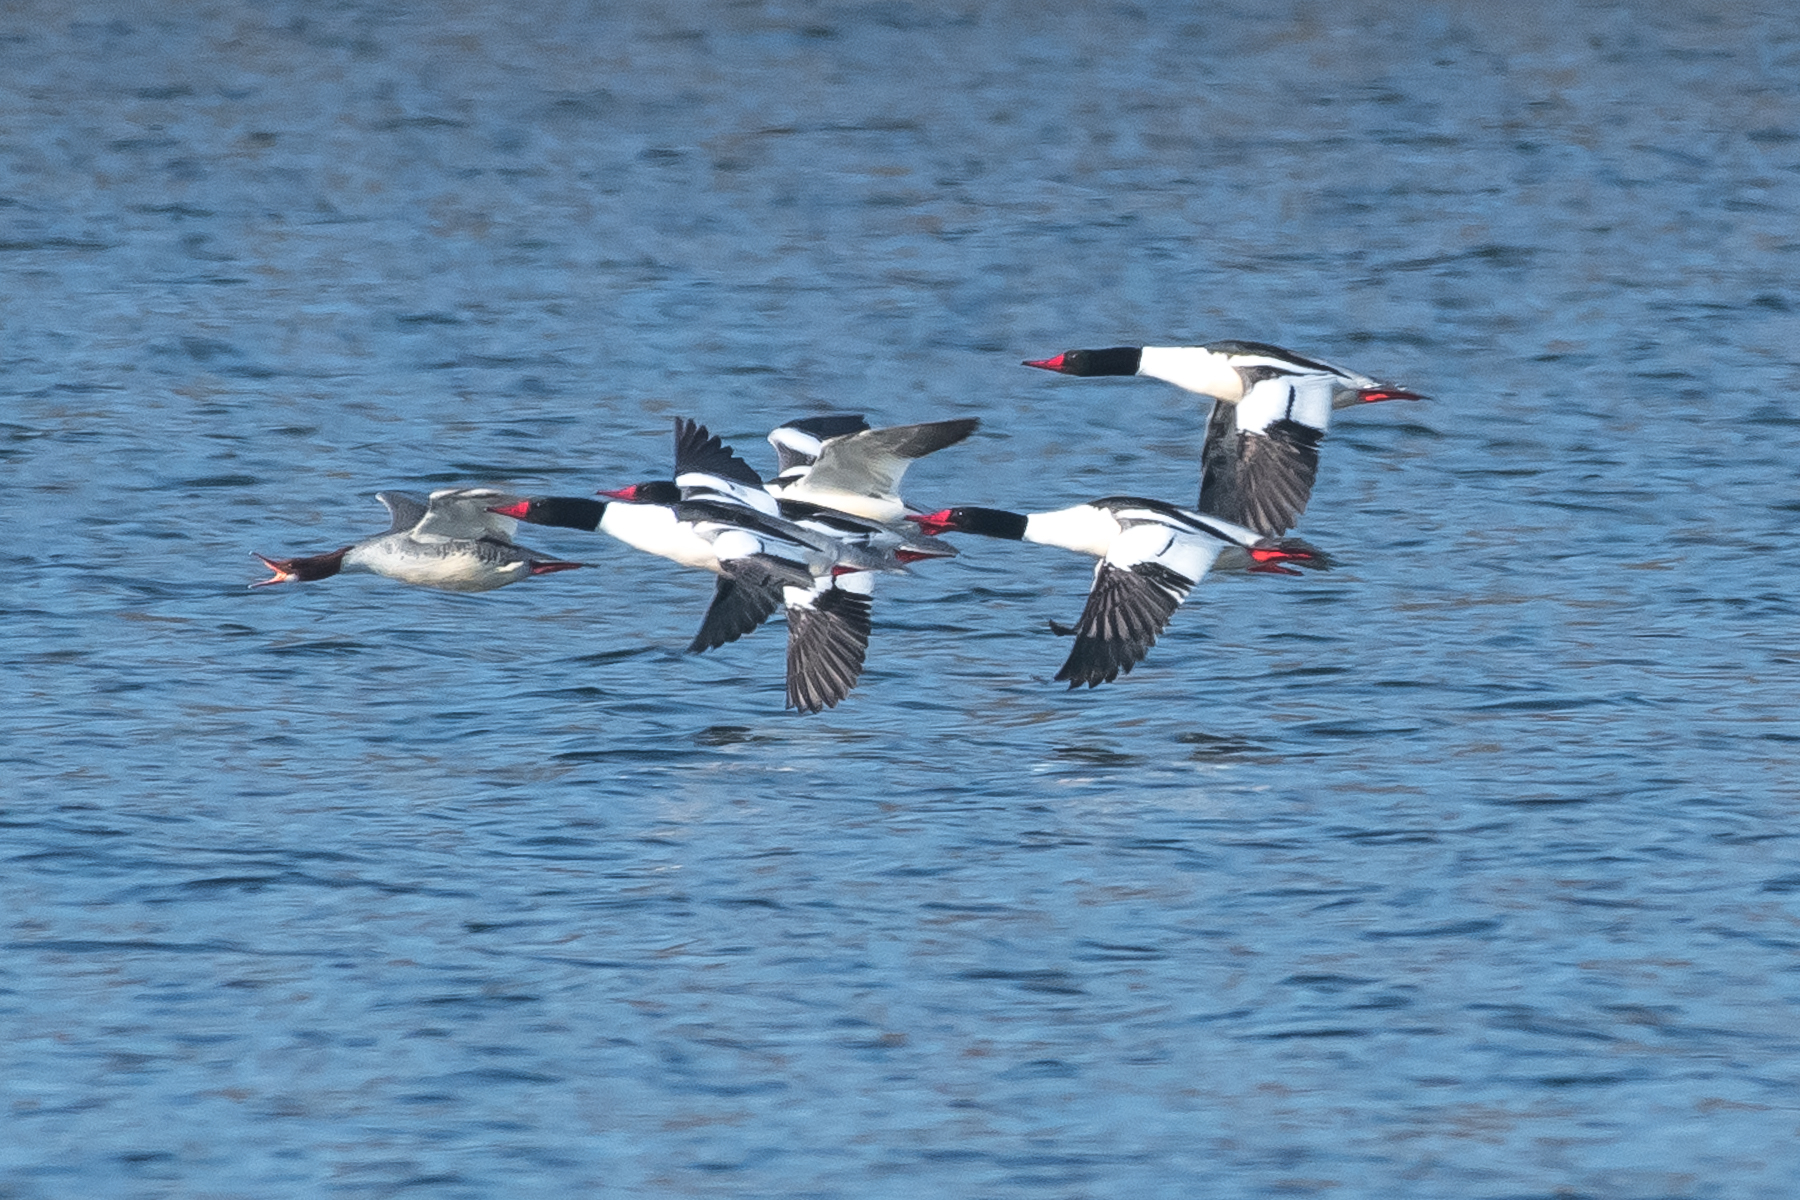   Common mergansers are everywhere right now during migration at Quabbin. The males are bright white with green heads an orange beaks. &nbsp;Here is a flock flying along being lead by a female merganser who is cheering them on as they fly. &nbsp;3/10